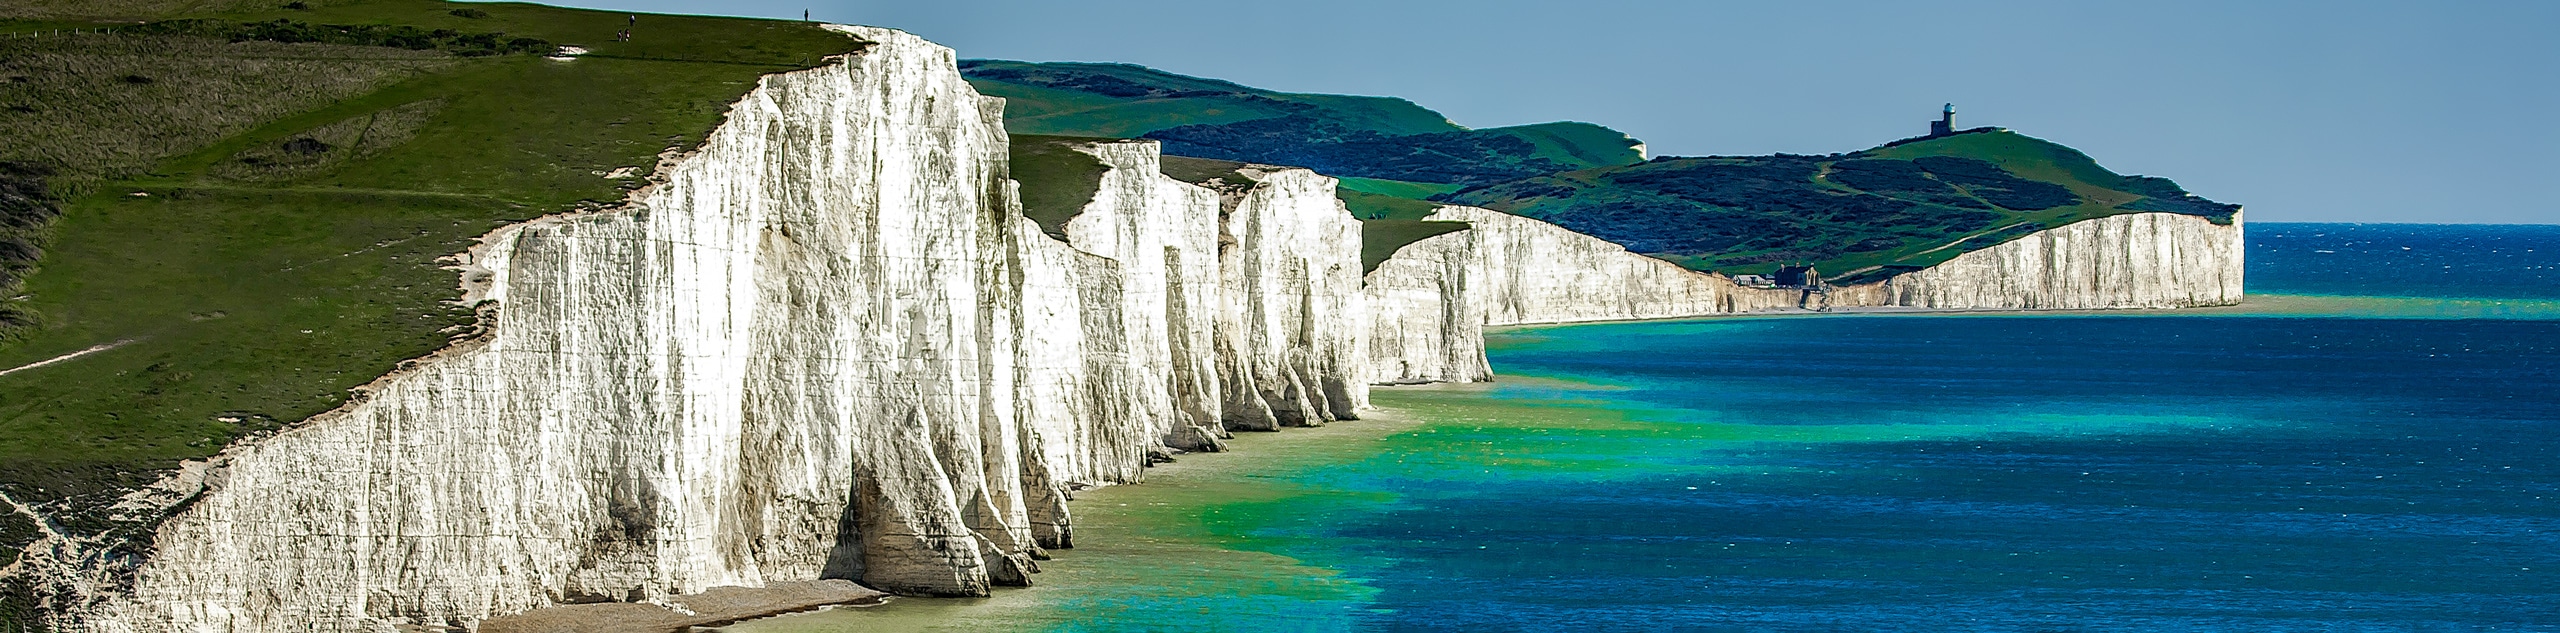 Seven Sisters and Friston Forest Circular Walk